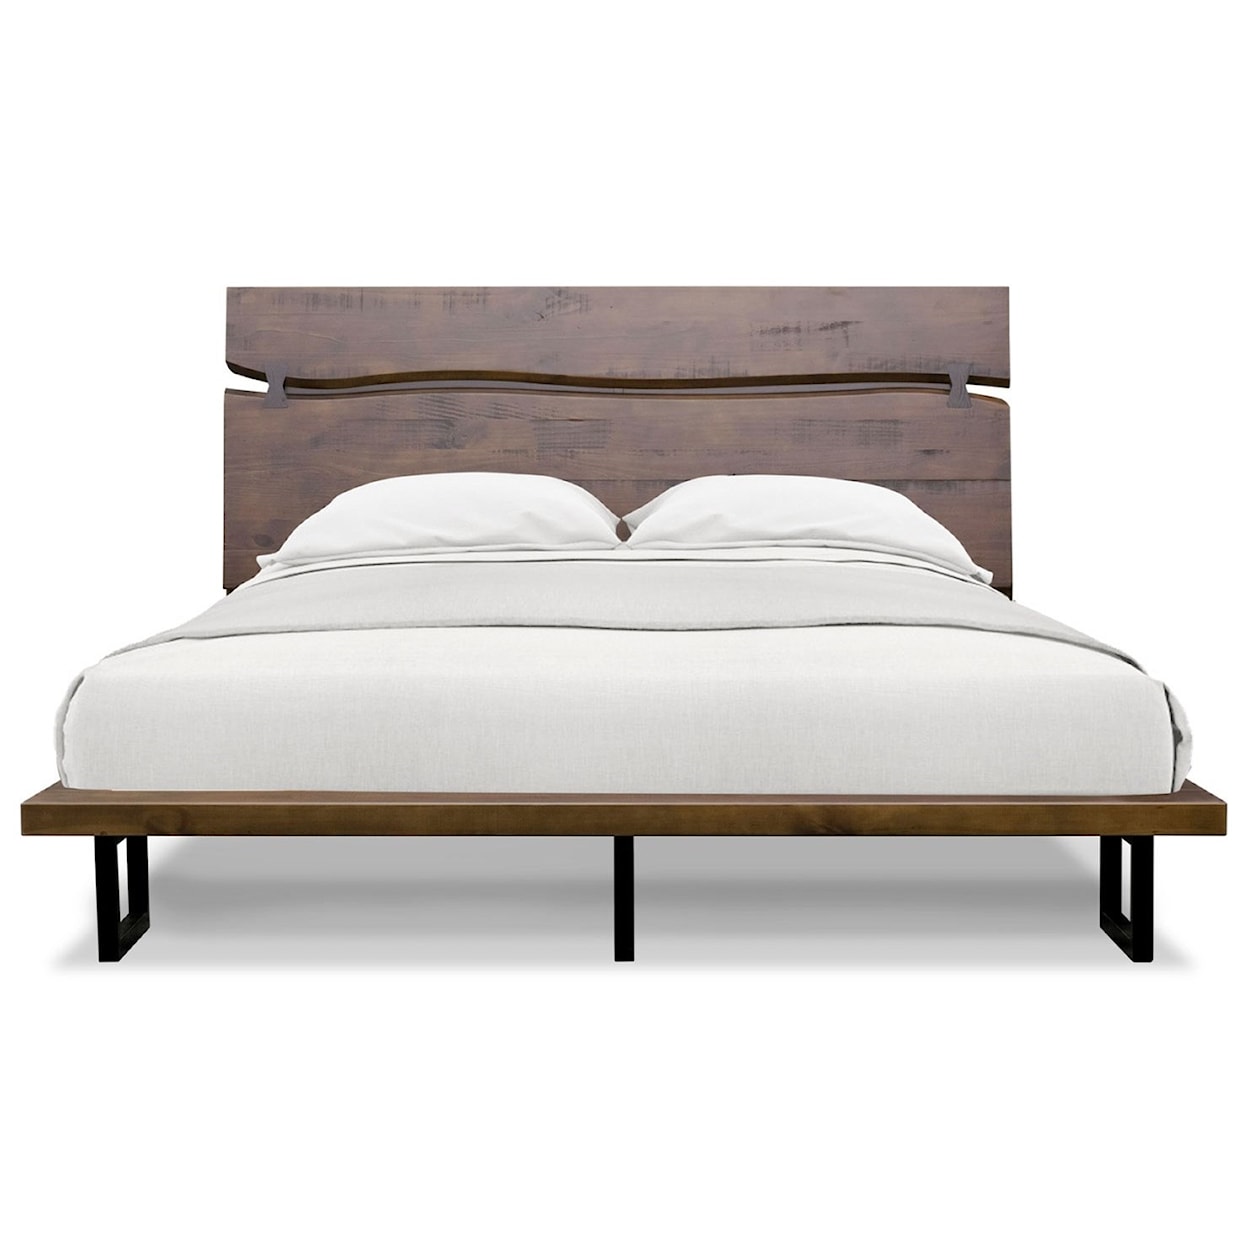 Steve Silver Pasco King Low Profile Bed